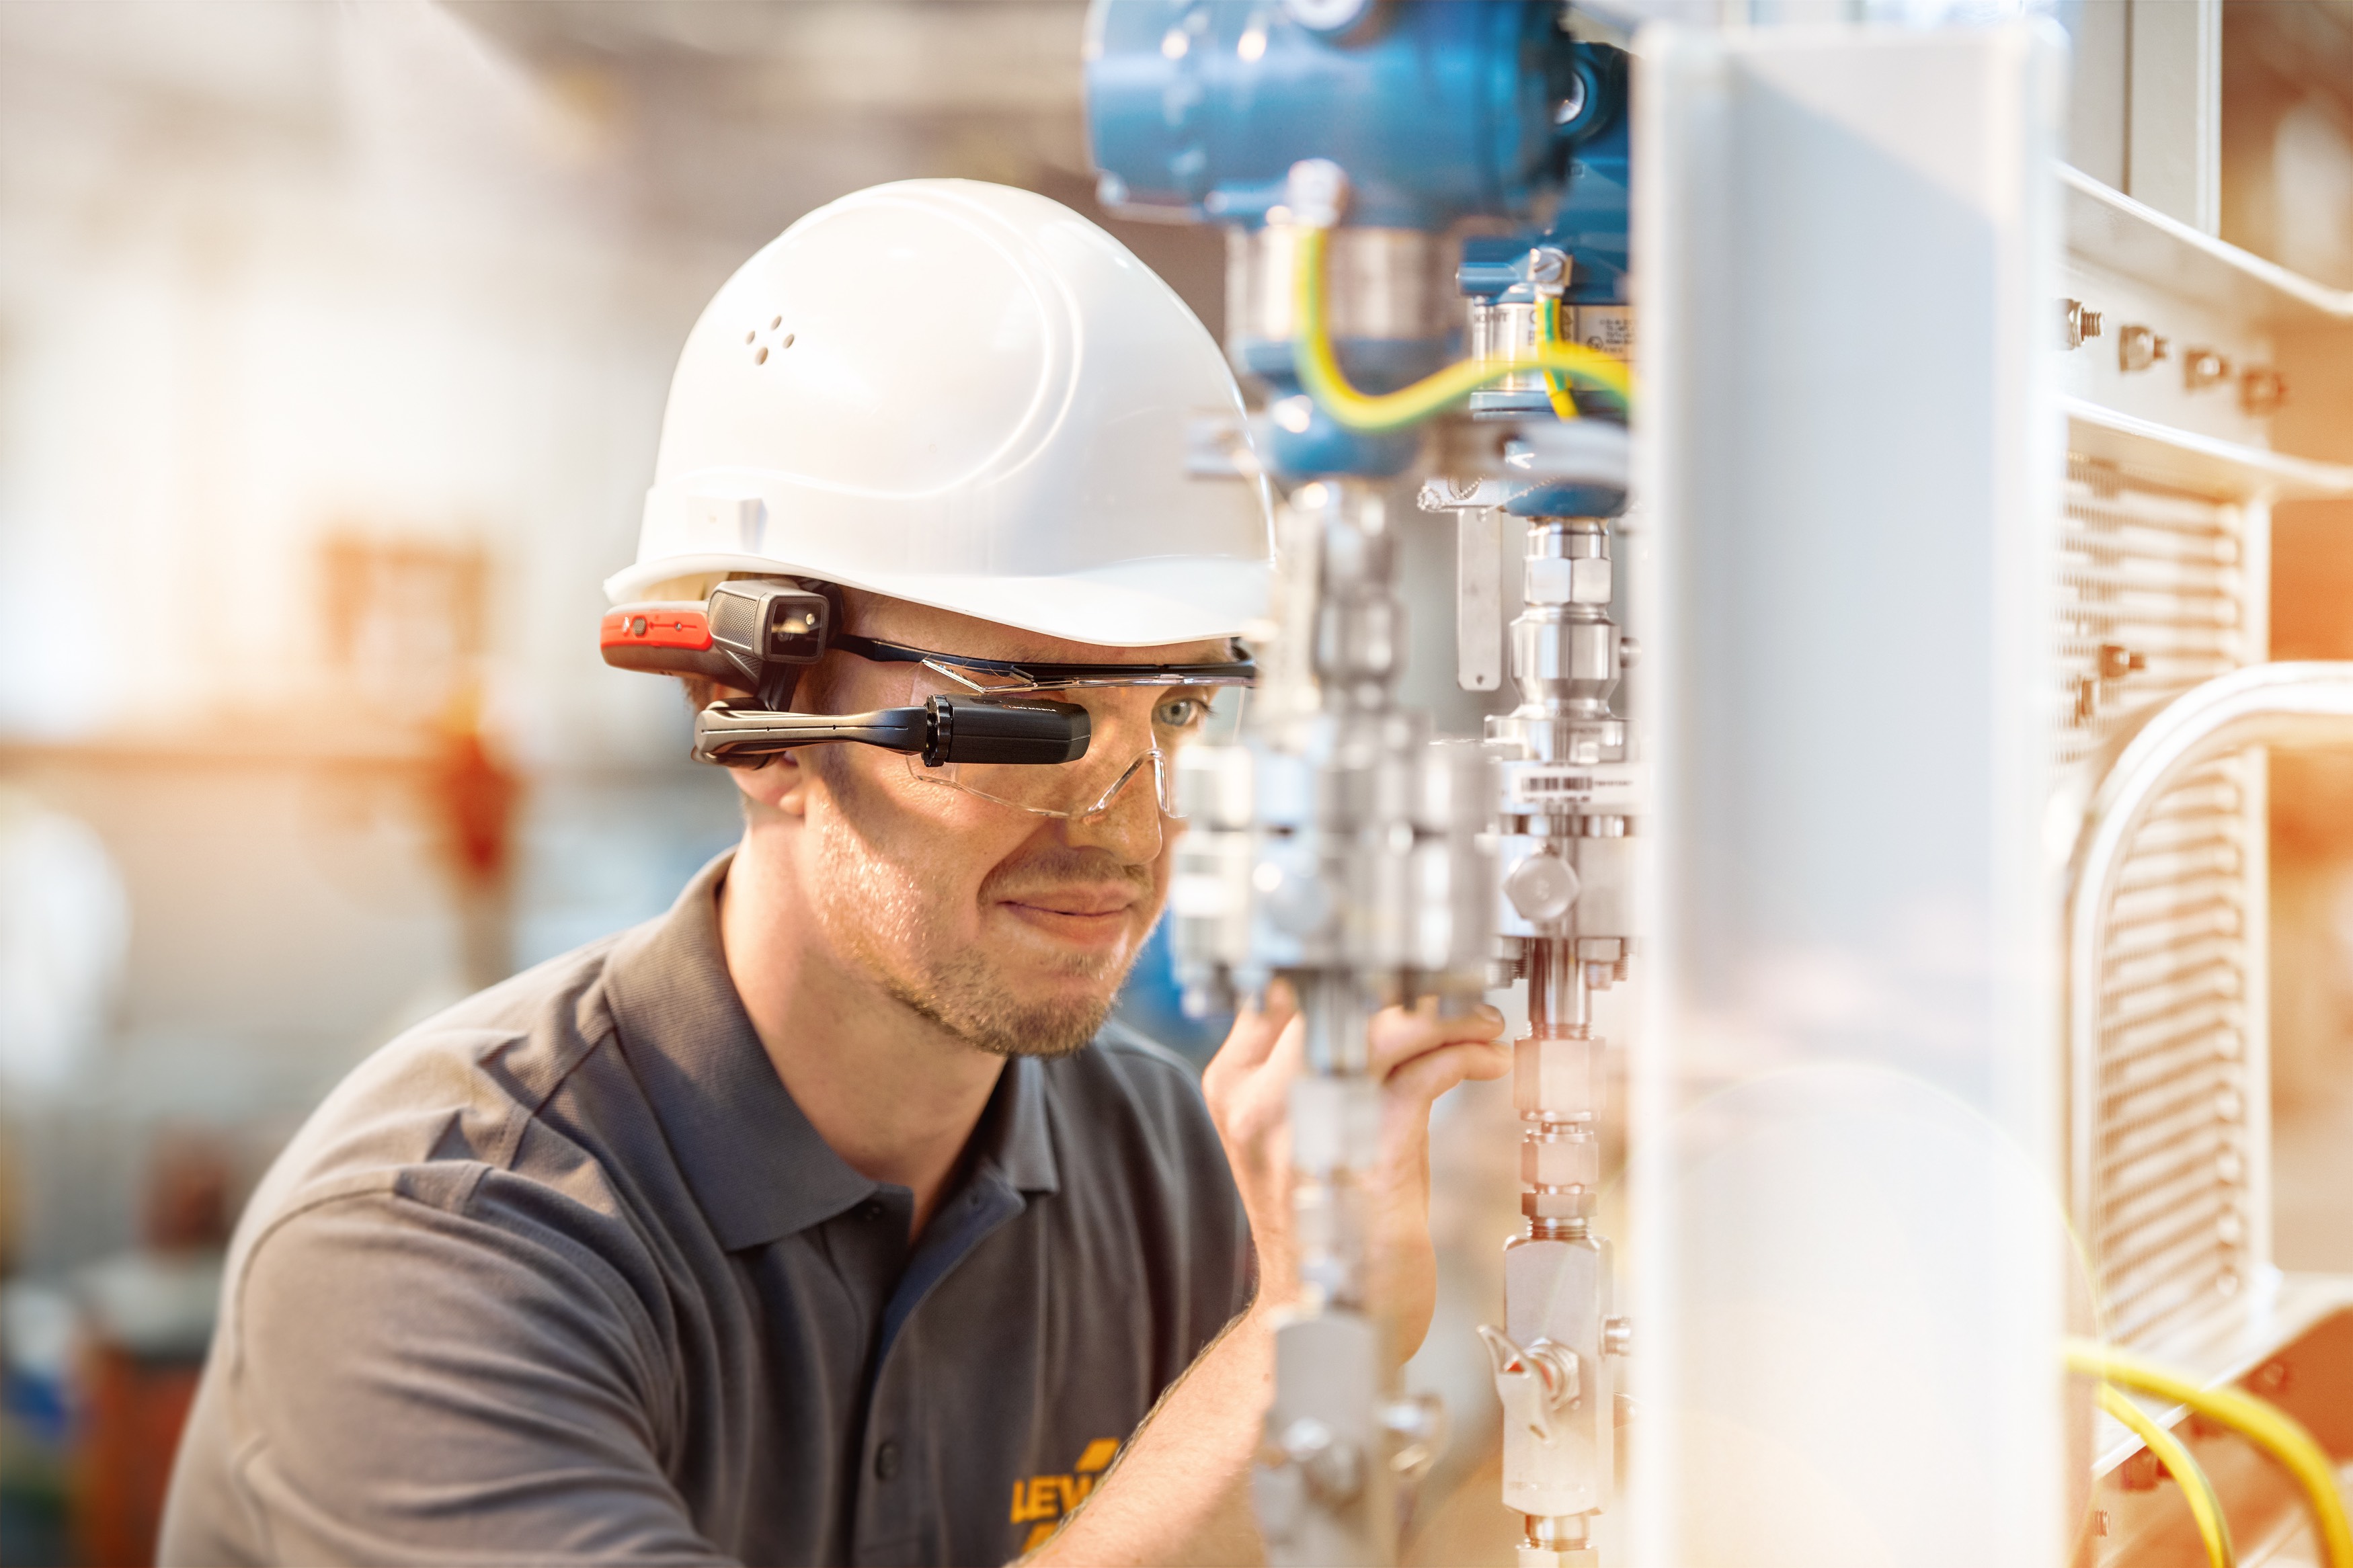 LEWA's bi-directional smart glasses connect a service technician through shared vision to see the plant through the eyes of the on-site technician when a malfunction occurs.